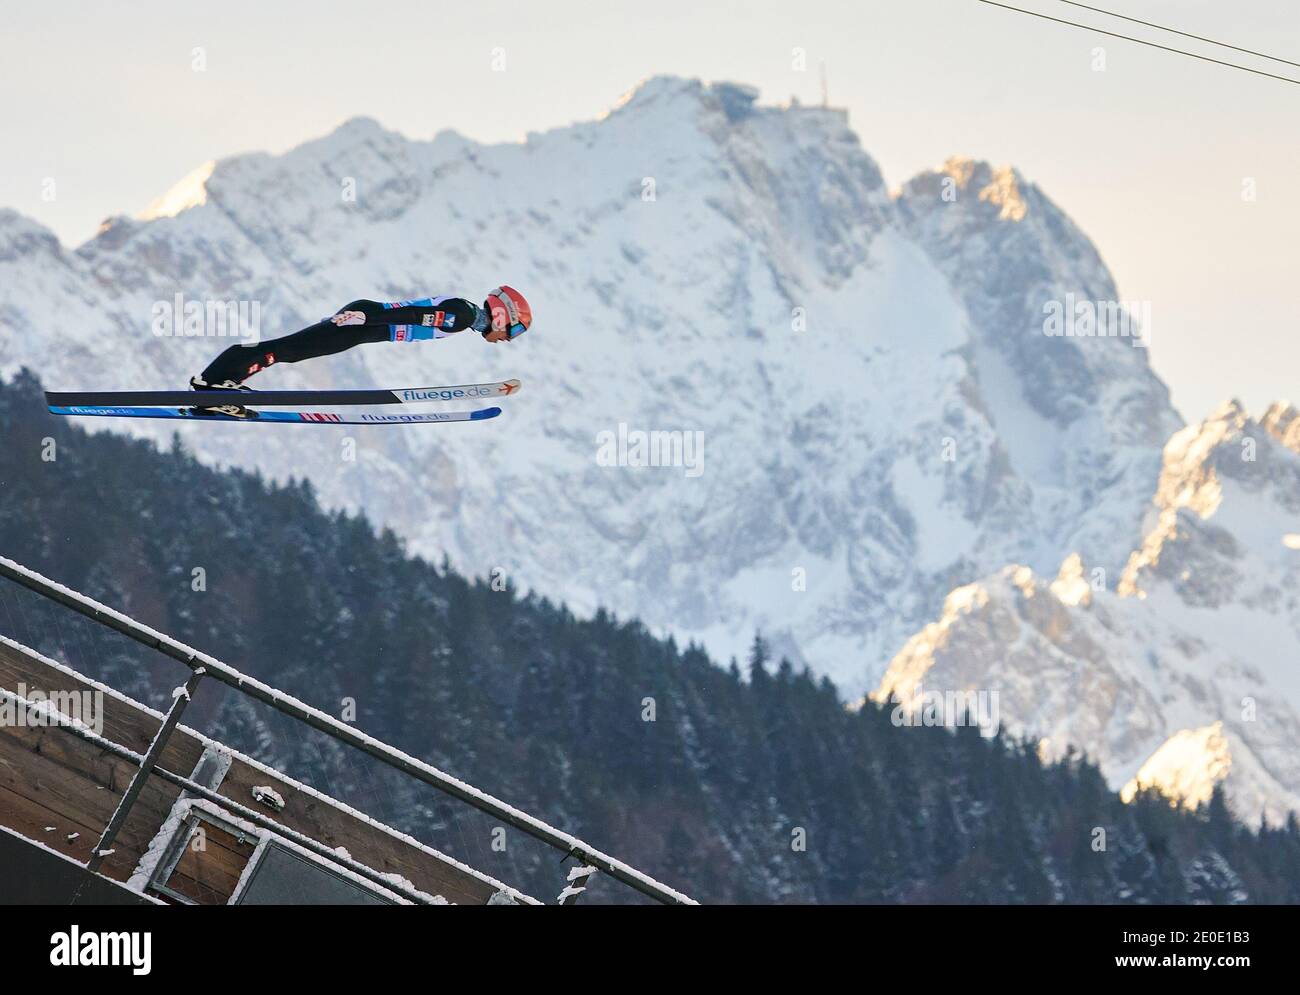 Jan HOERL, AUT in action in front of Zugspitze mountain at the Four Hills Tournament Ski Jumping at Olympic Stadium, Grosse Olympiaschanze in Garmisch-Partenkirchen, Bavaria, Germany, December 31, 2020.  © Peter Schatz / Alamy Live News Stock Photo